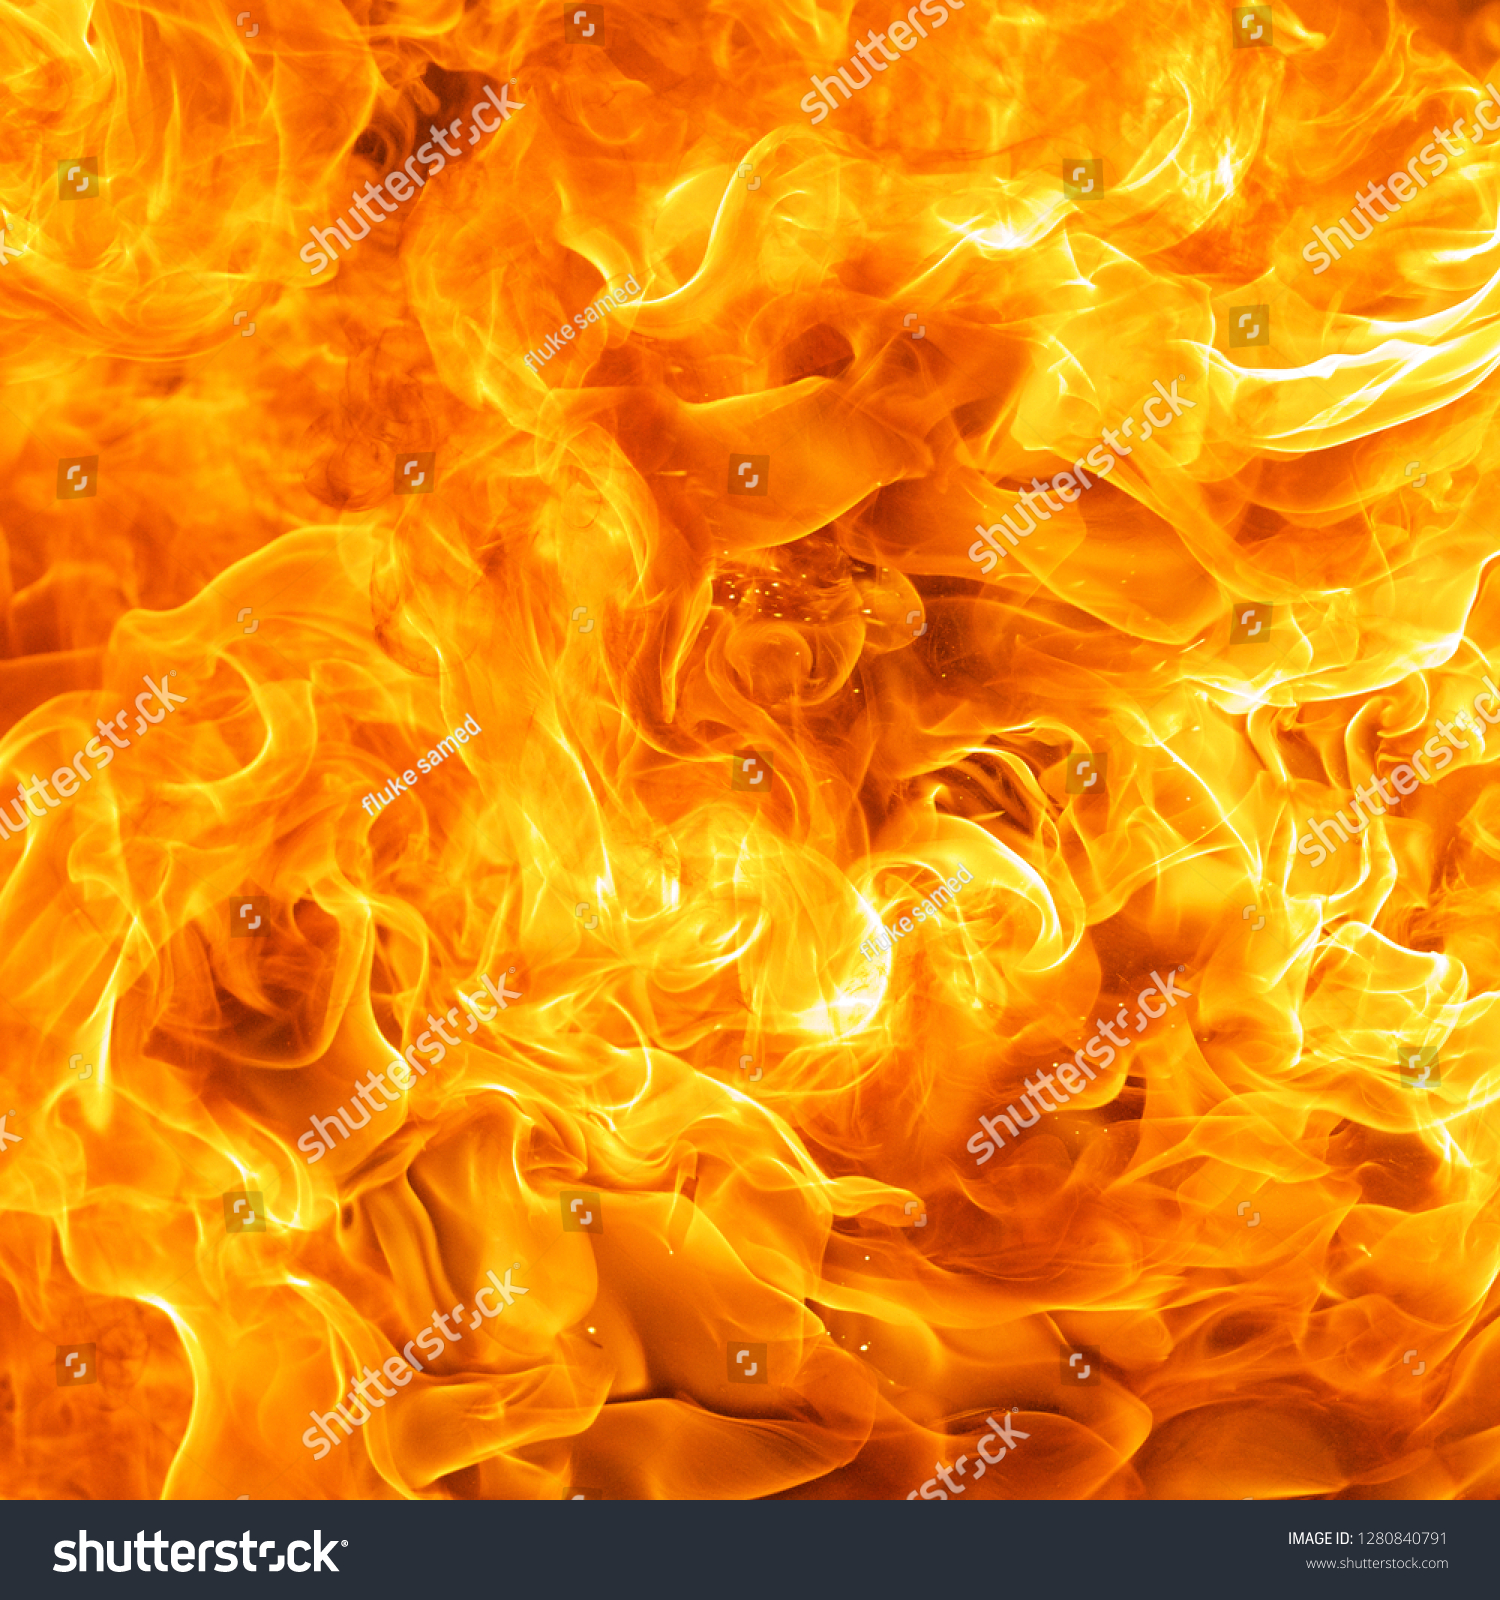 abstract blaze fire flame texture background #1280840791